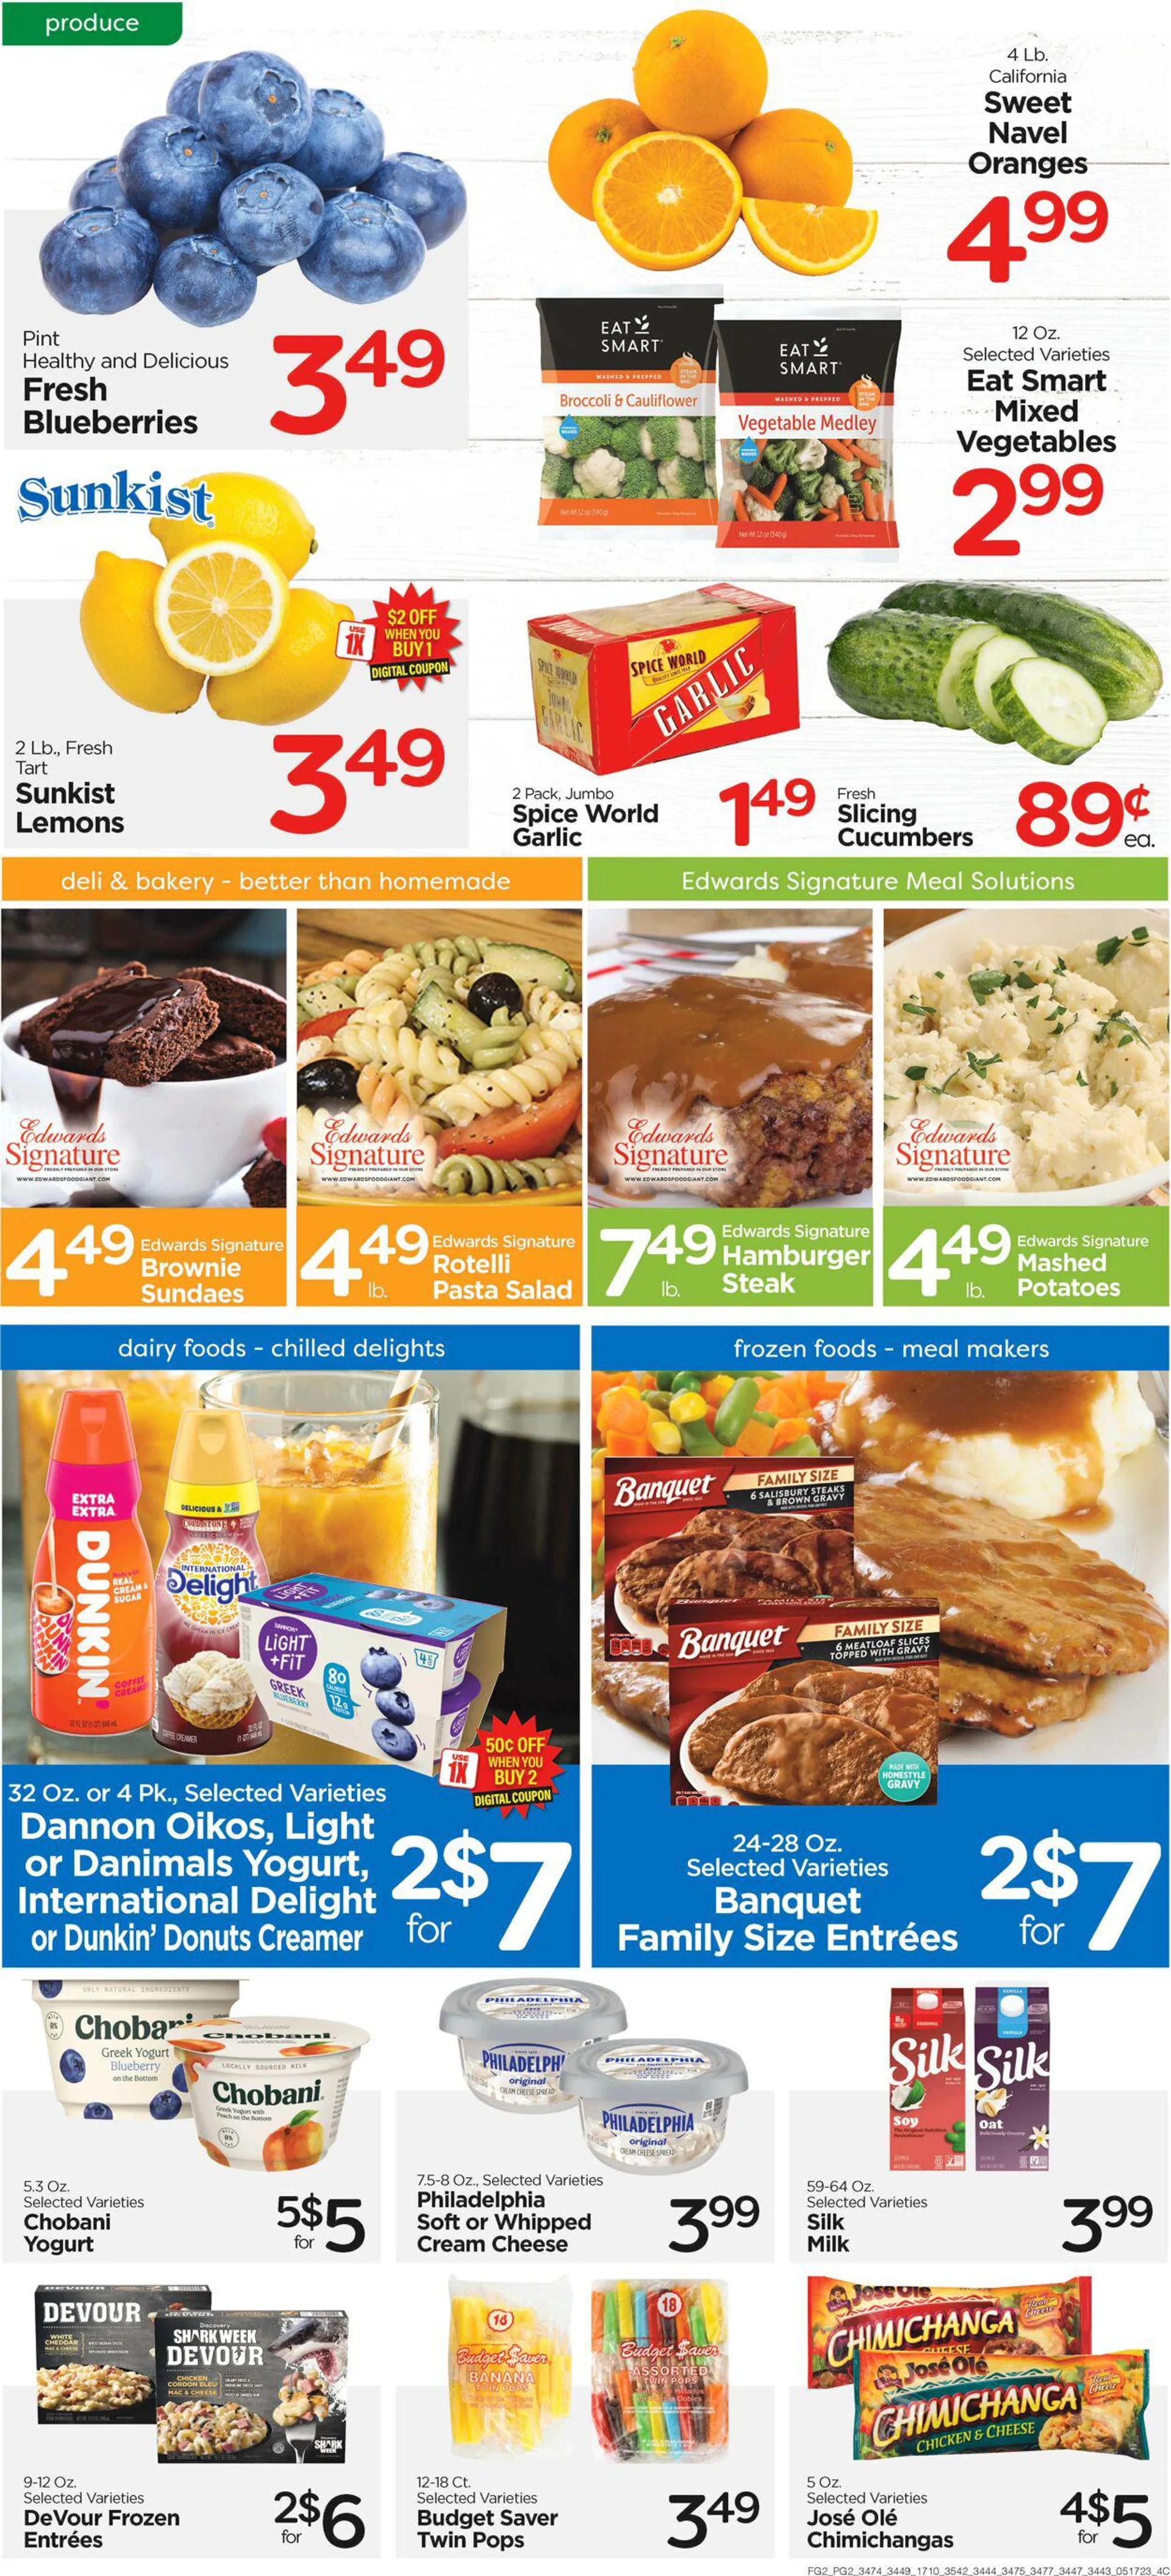 Edwards Food Giant Current weekly ad - 2